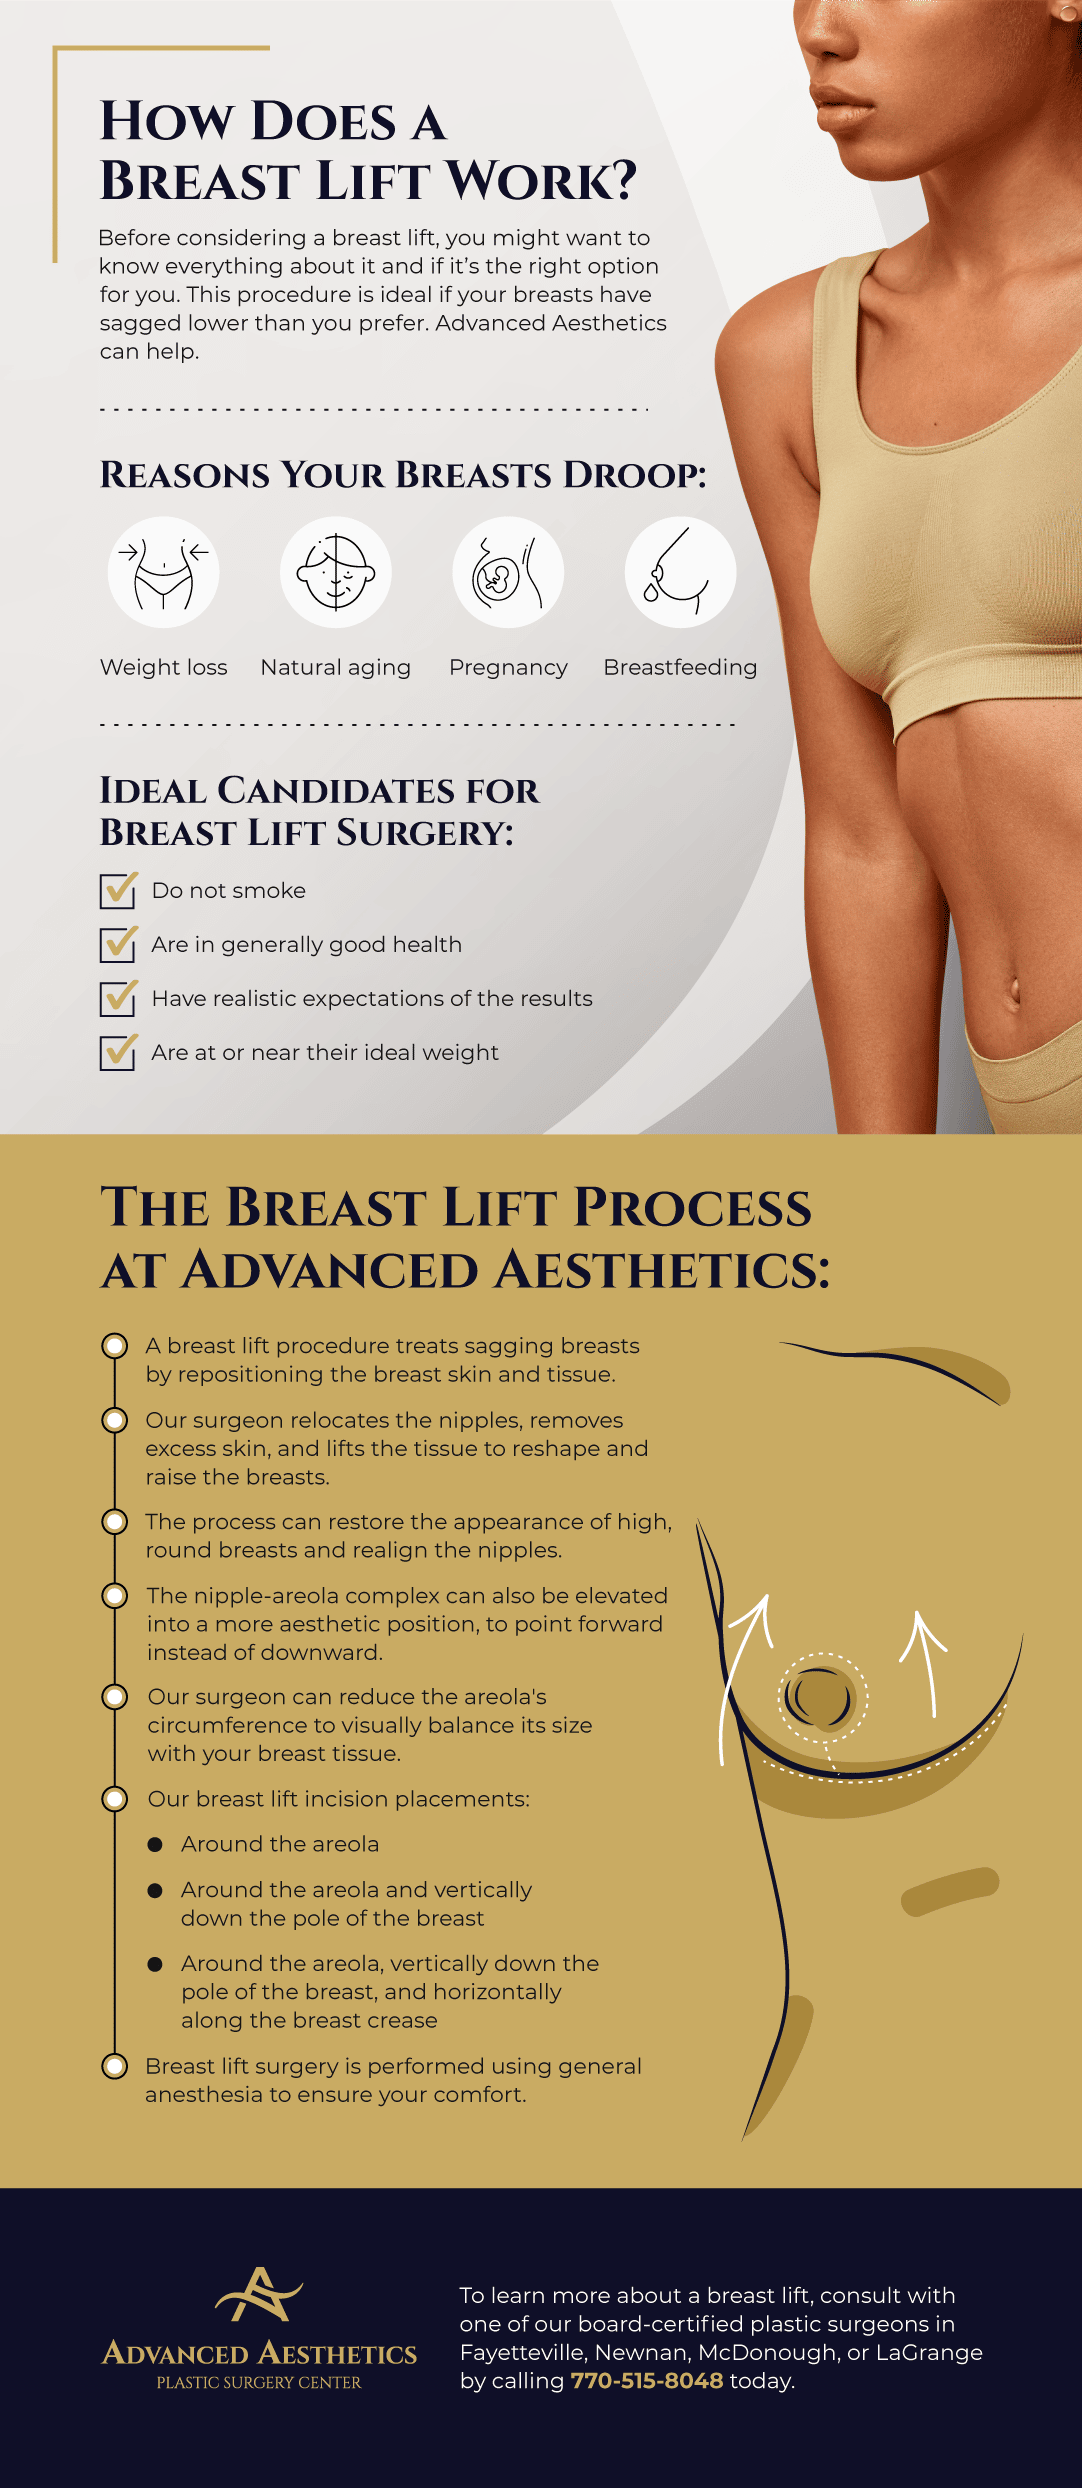 How Does Laser Breast Lifting Work?